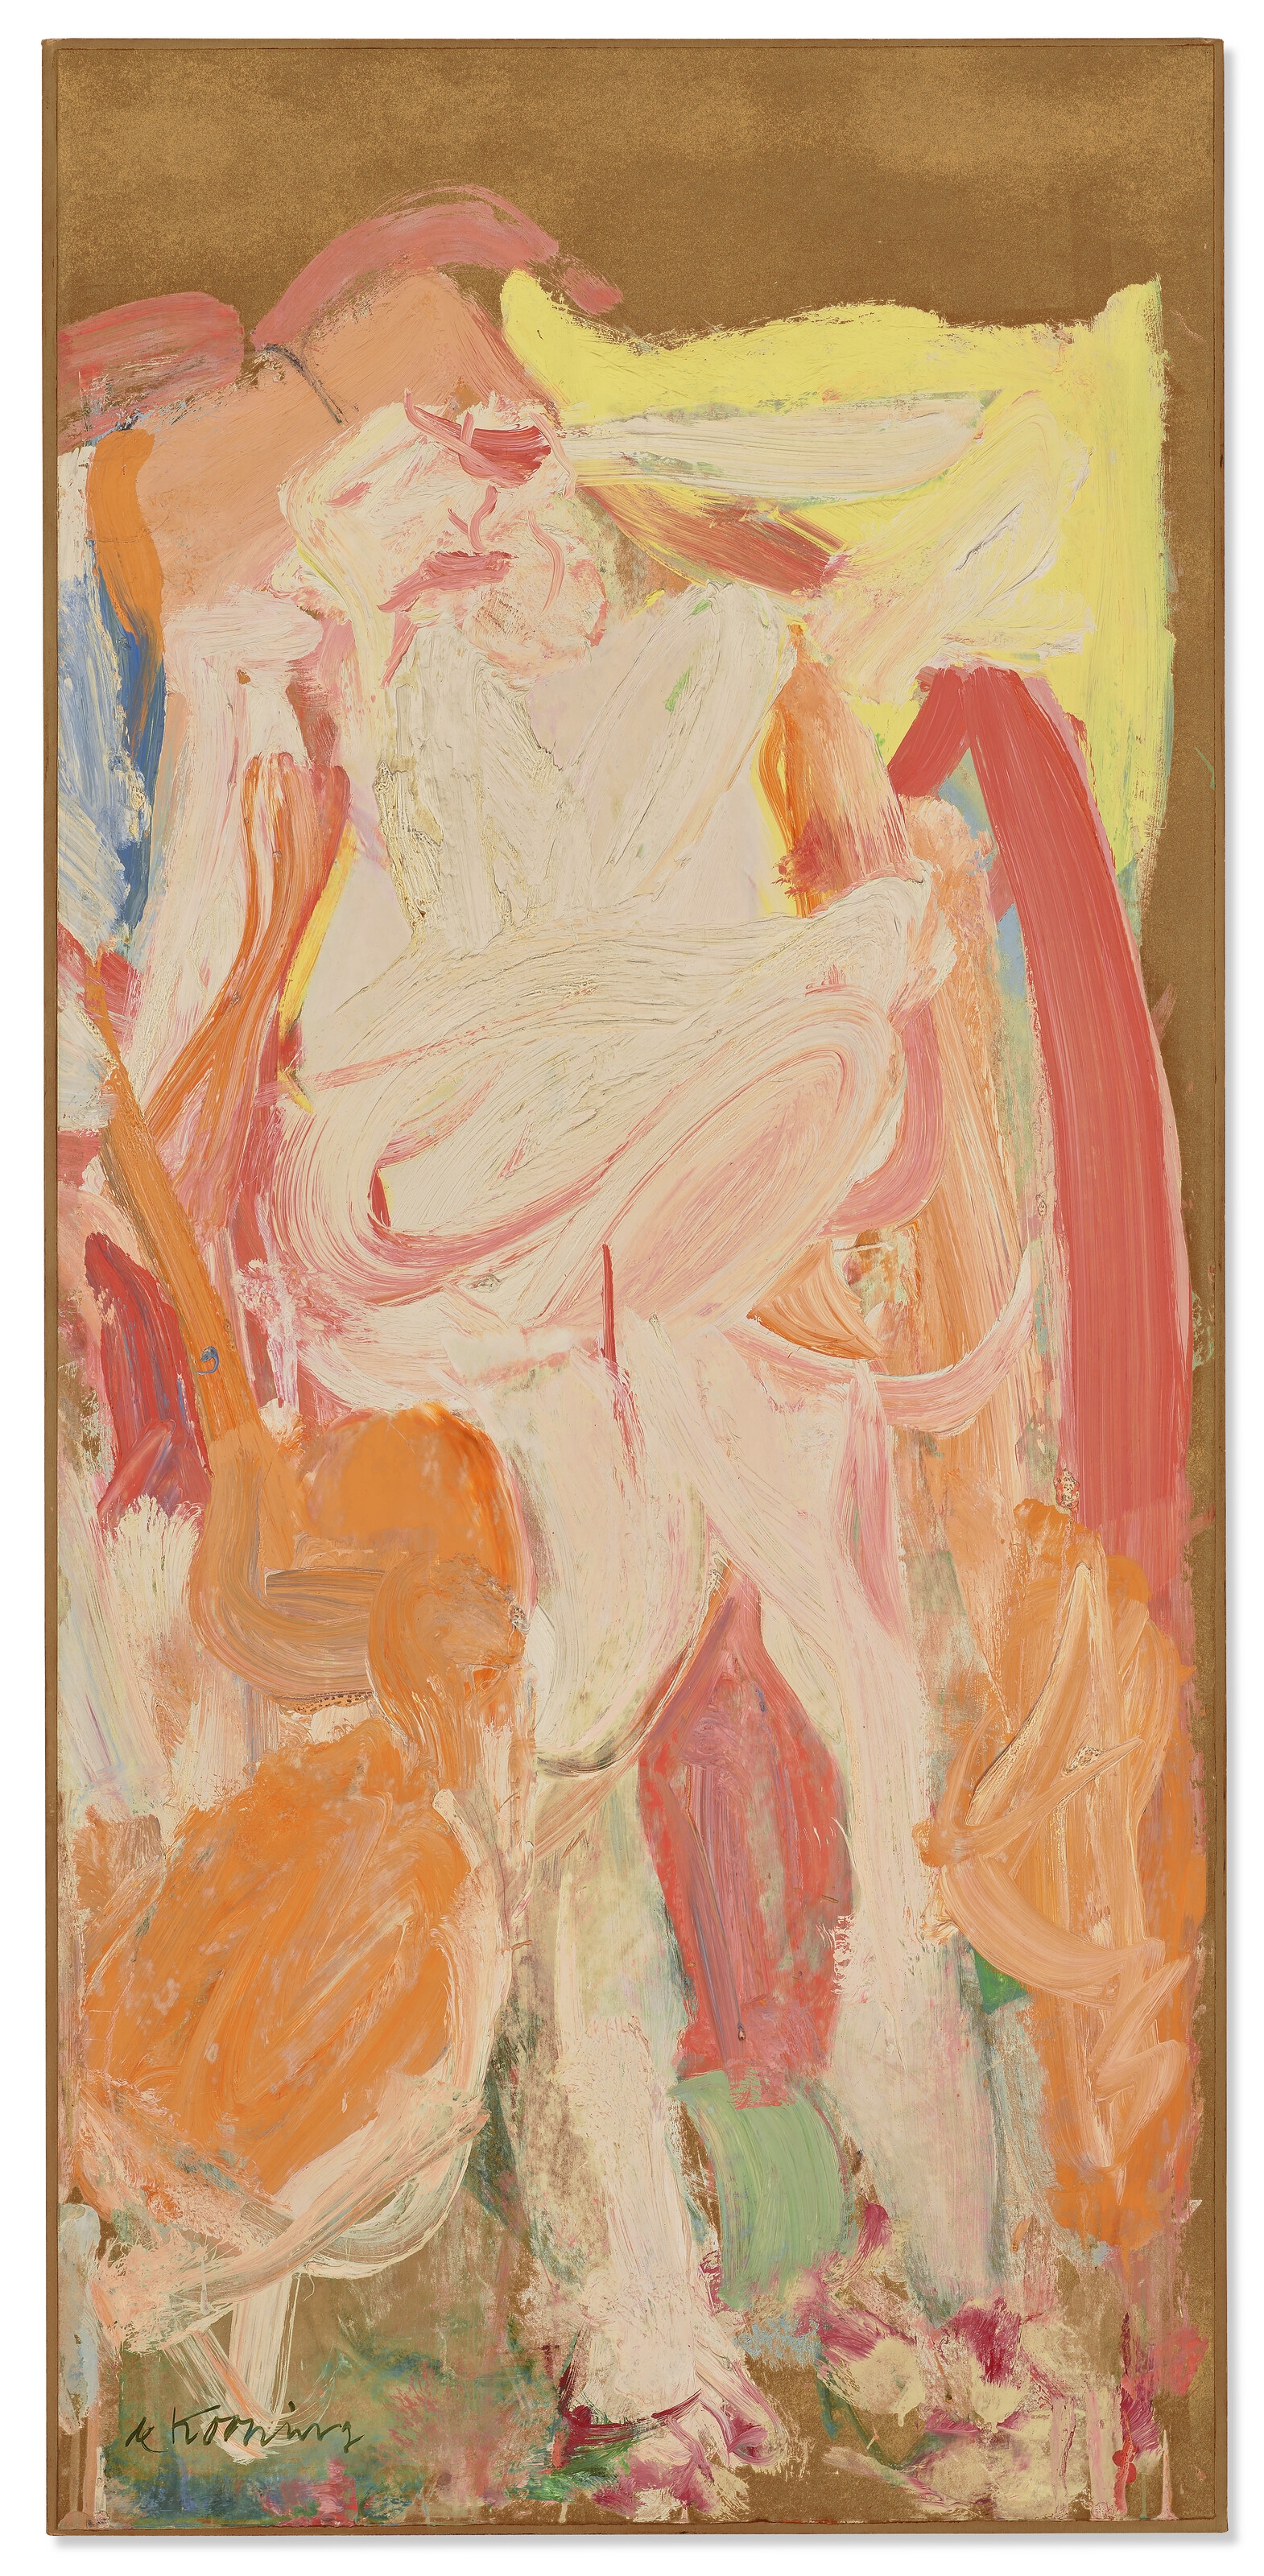 Woman in a Rowboat - Willem de Kooning